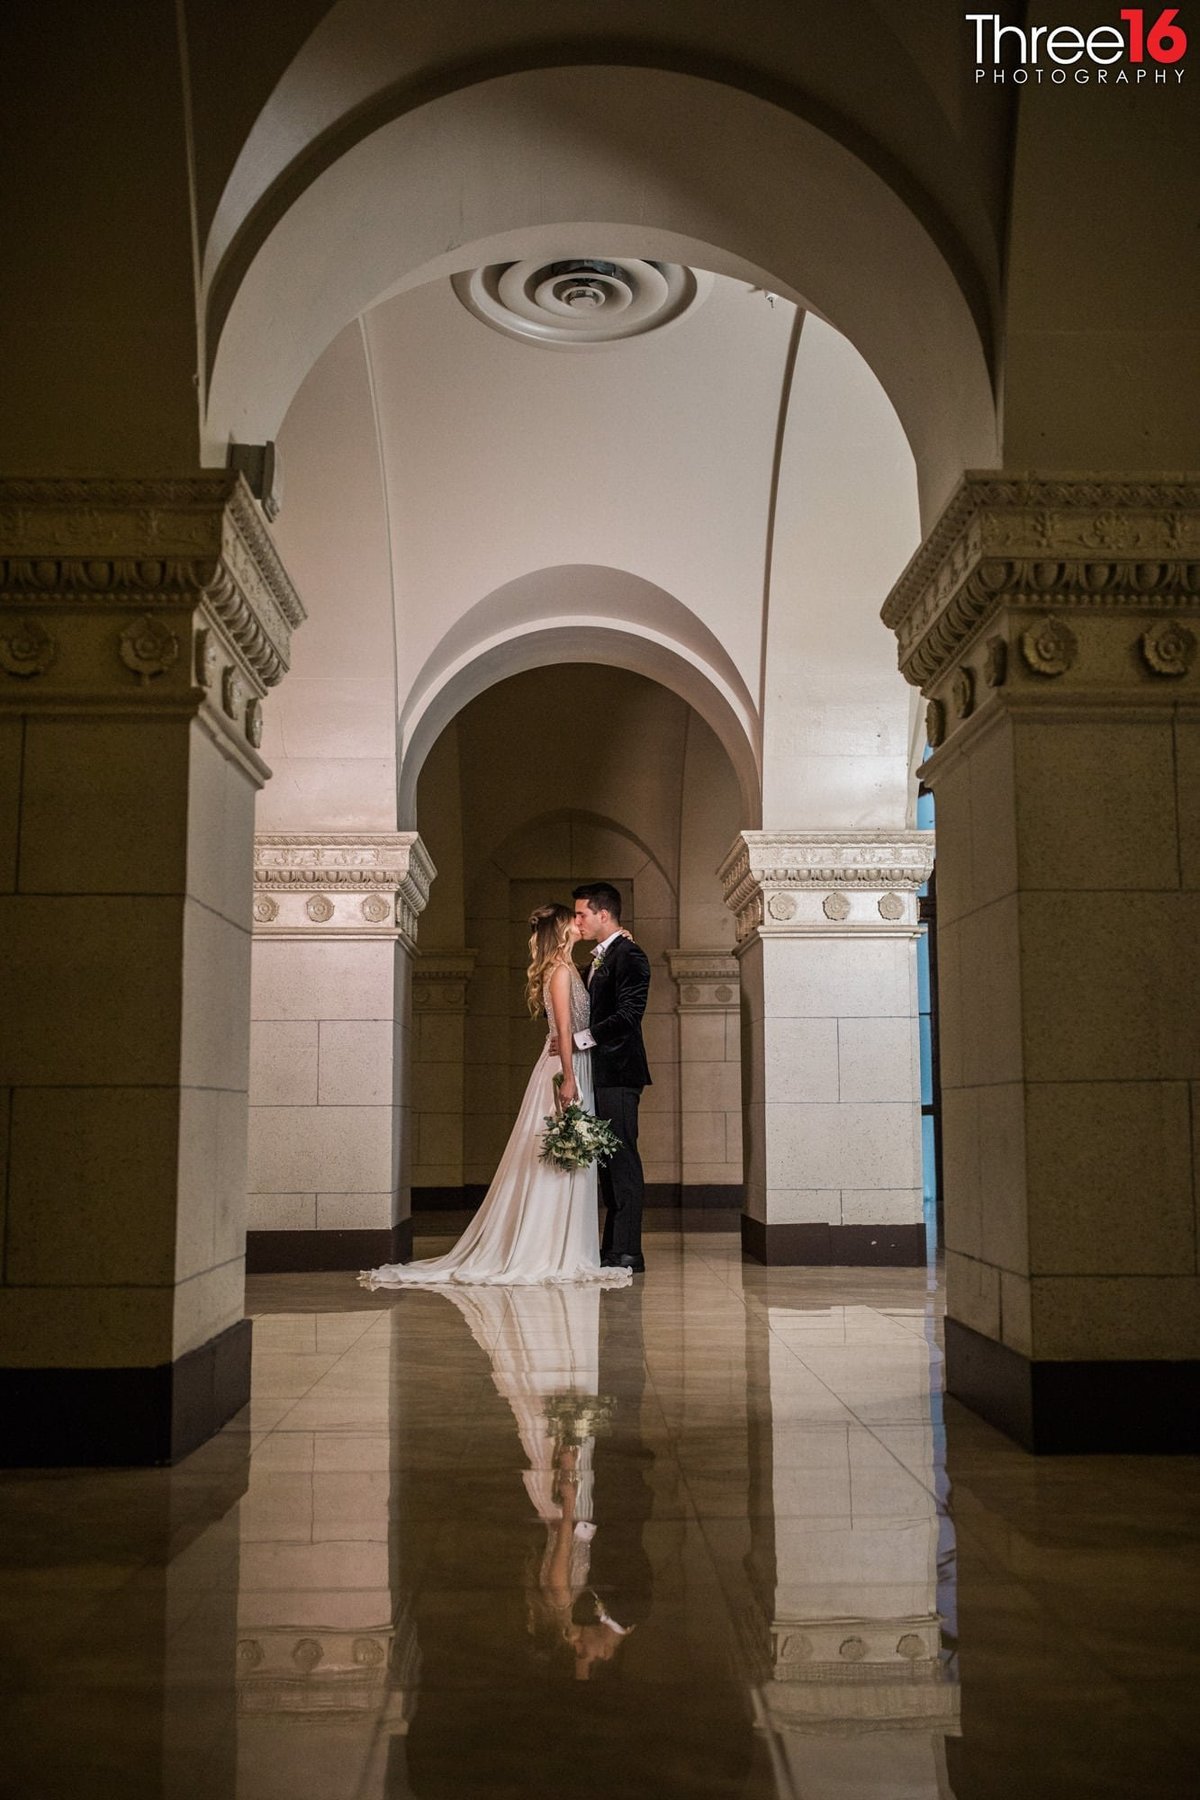 Bride and Groom share an intimate kiss together in the hallway at The Majestic Downtown in LA